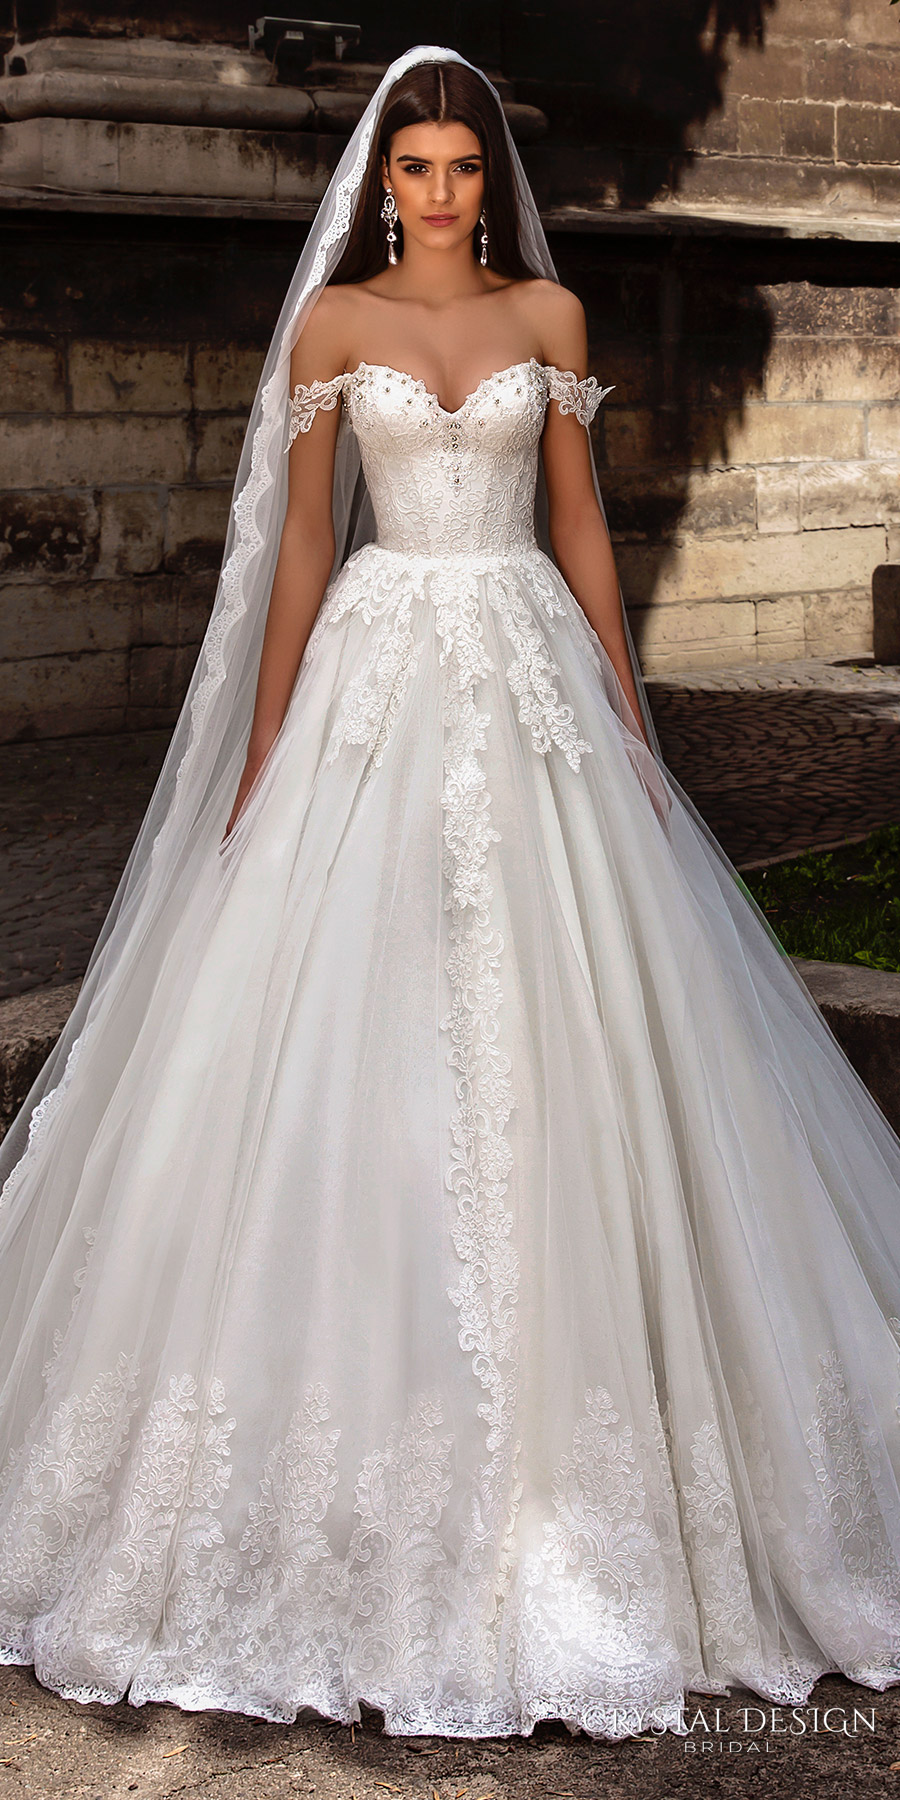 Princess wedding dress with heavily embellished bodice and full skirt